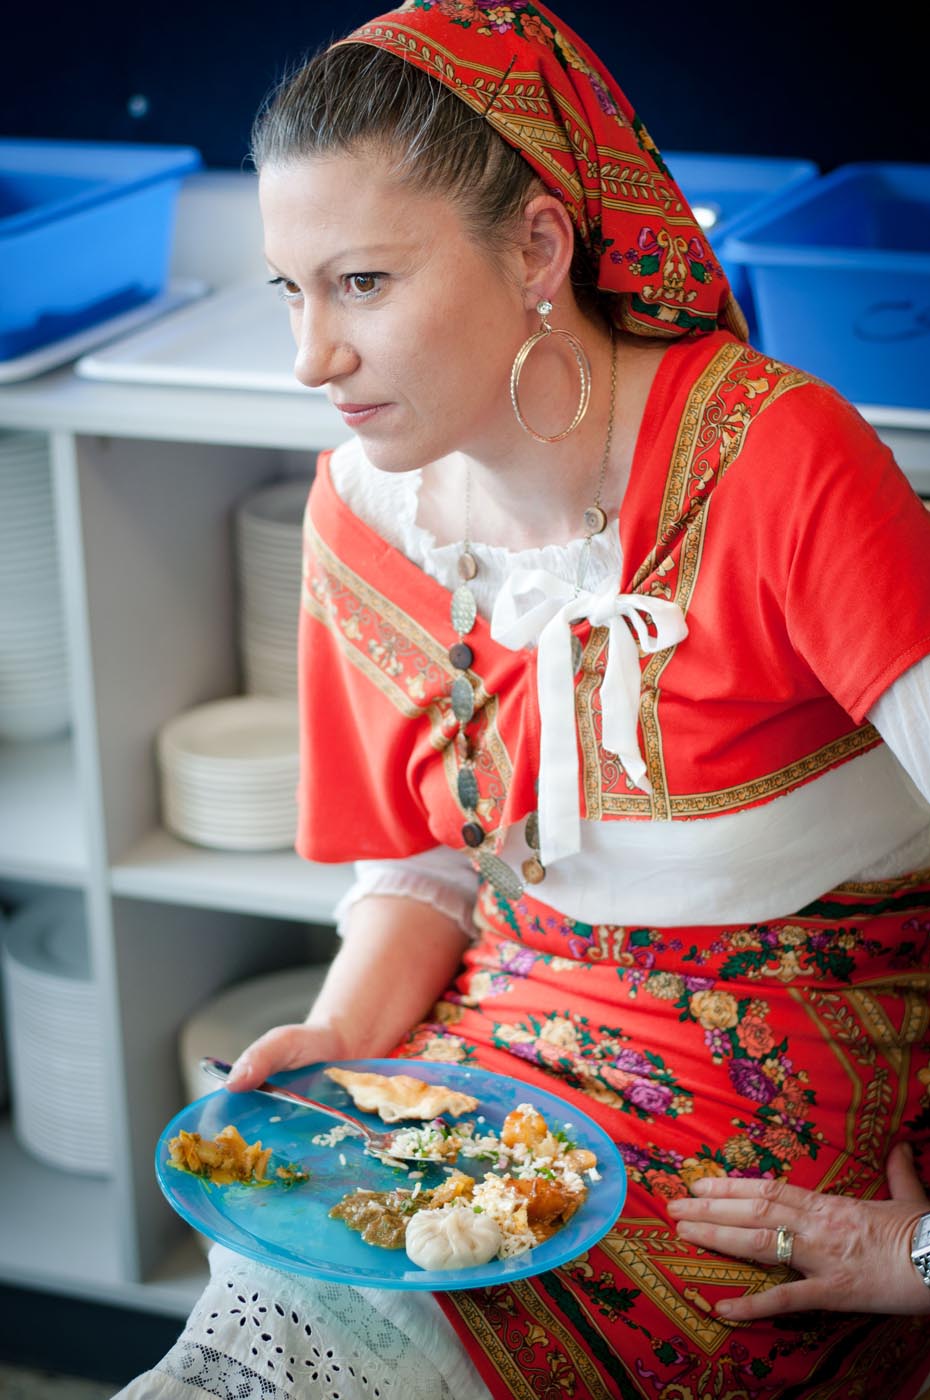 Photo showing a lady wearing her national costume seated with a plate of food on her lap - click to view larger image